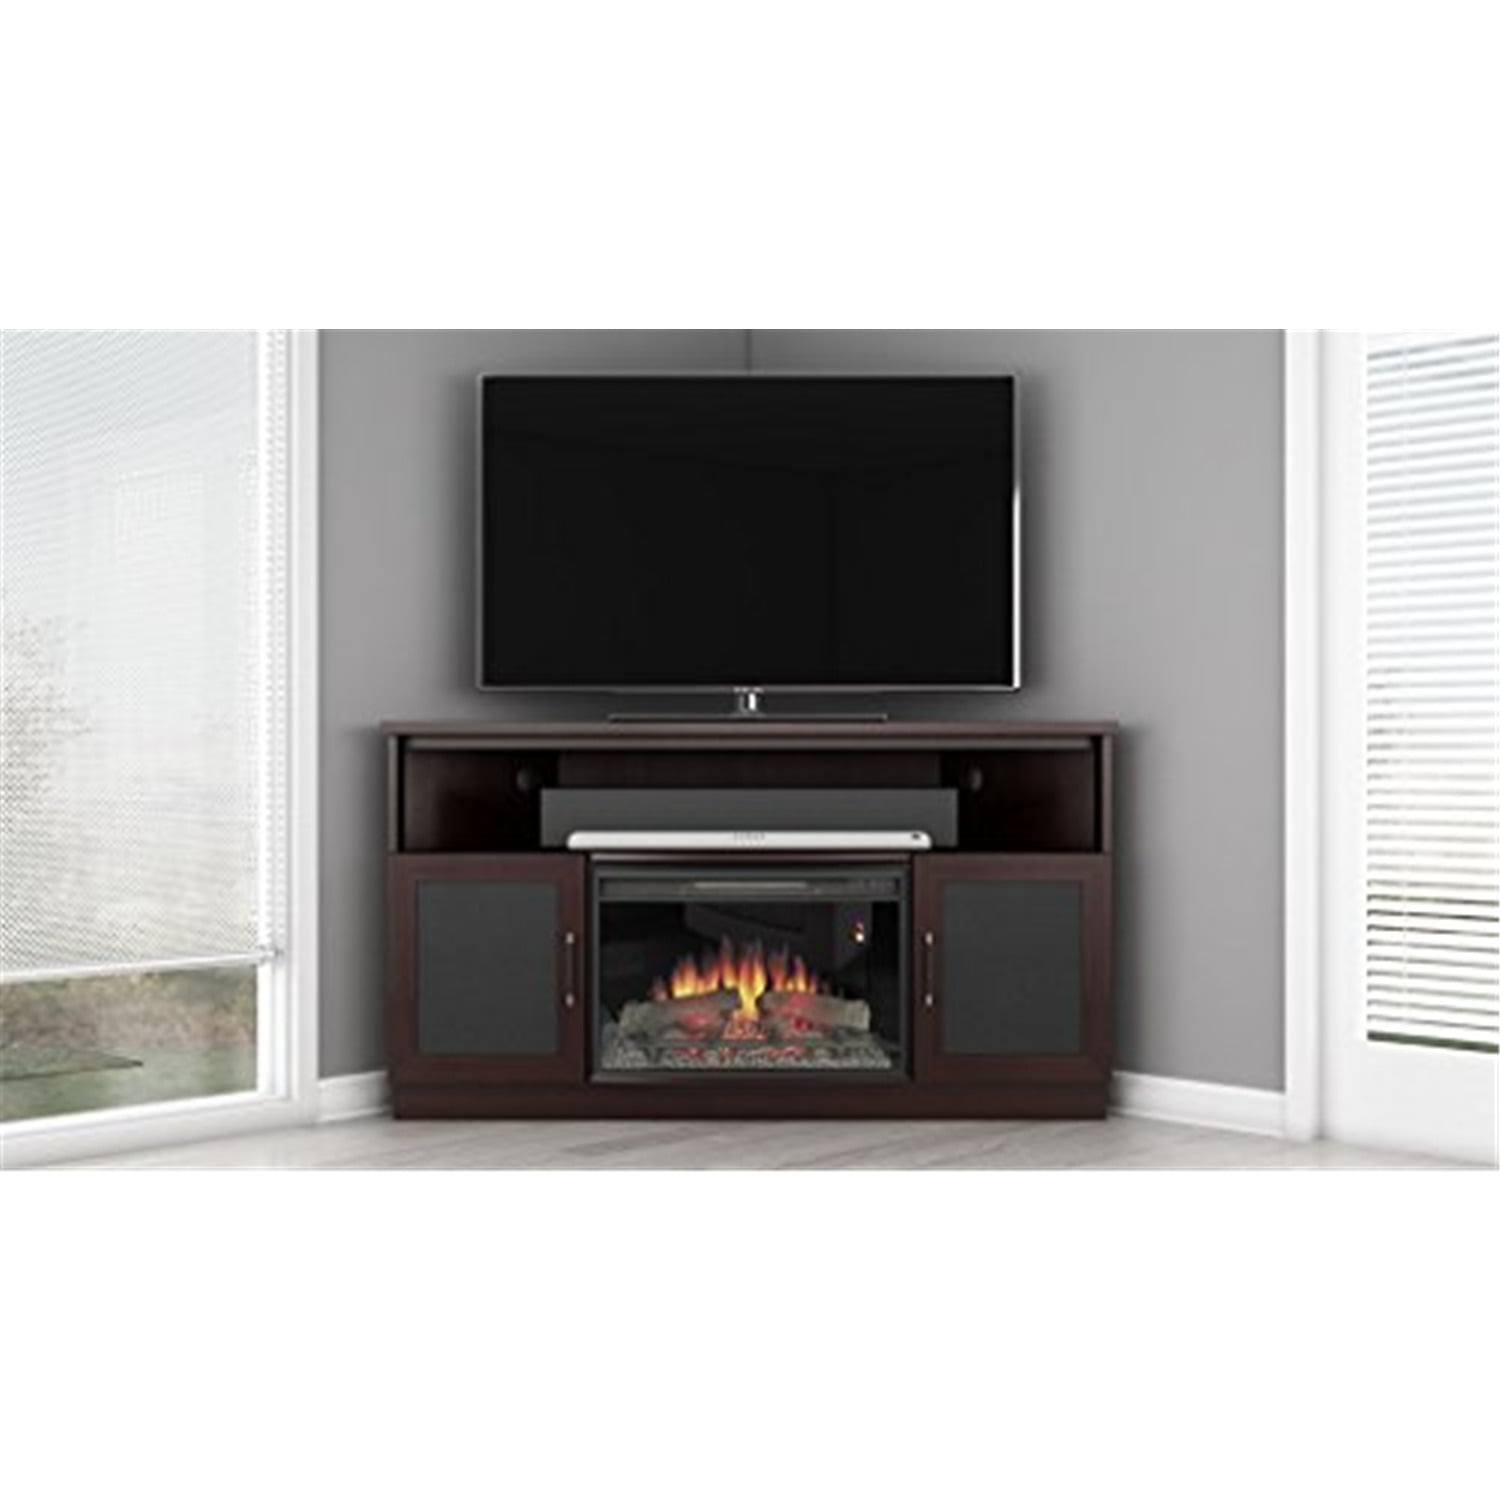 60 Contemporary Tv Corner Console With, Chanceen 60 Tv Stand With Electric Fireplace